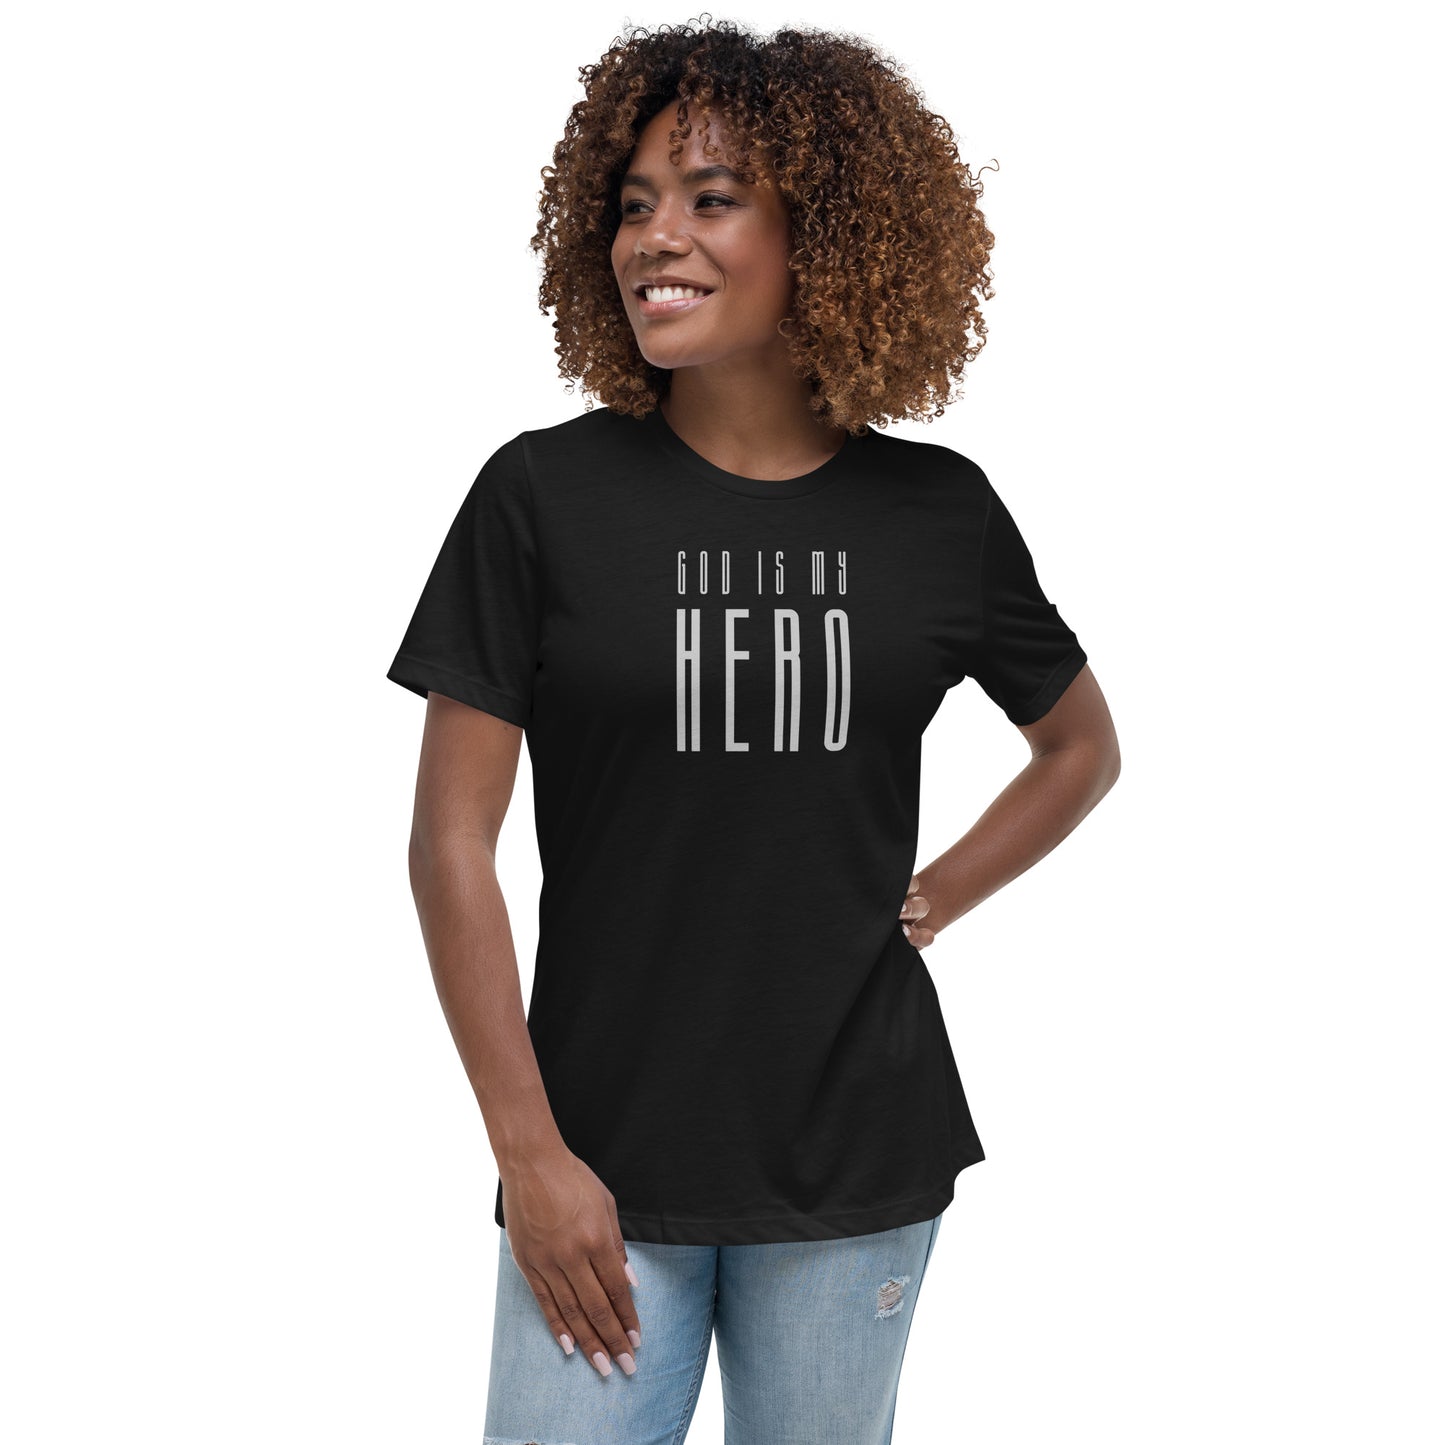 GOD IS MY HERO Women's Relaxed T-Shirt